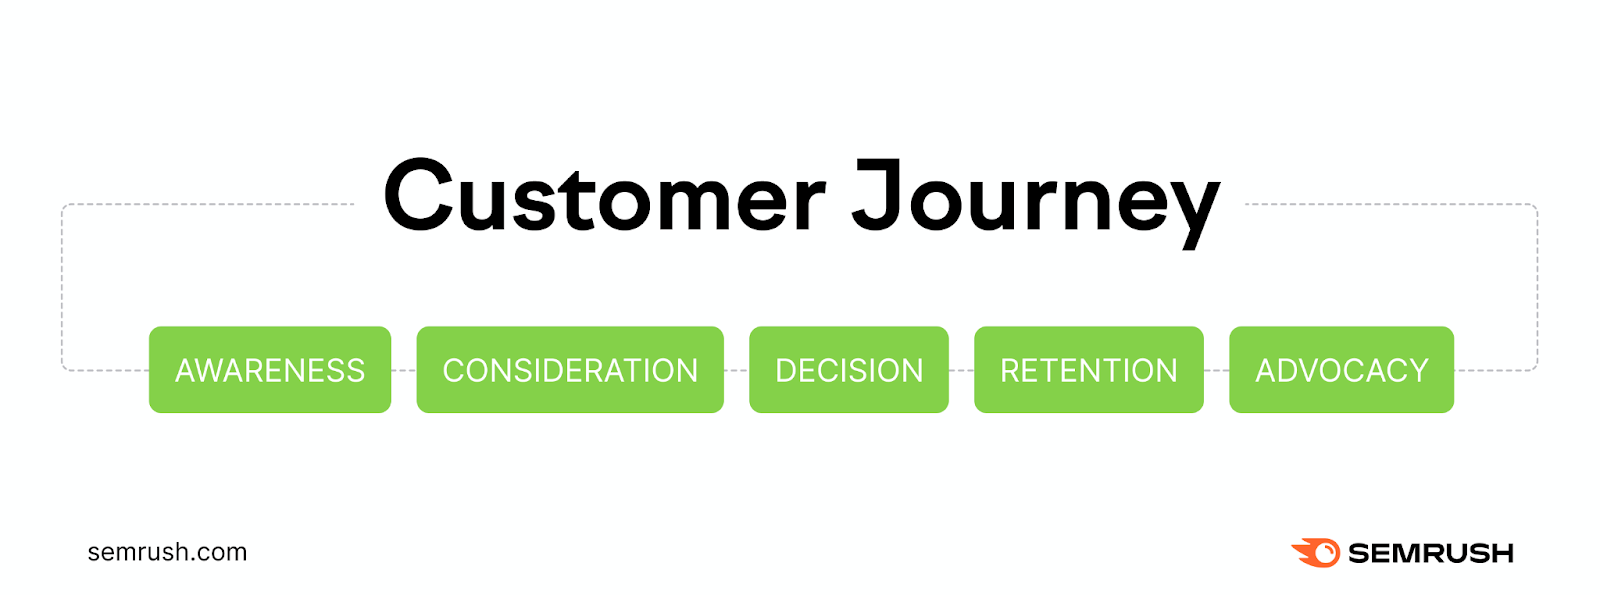 Customer journey steps, including awareness, consideration, decision, retention and advocacy